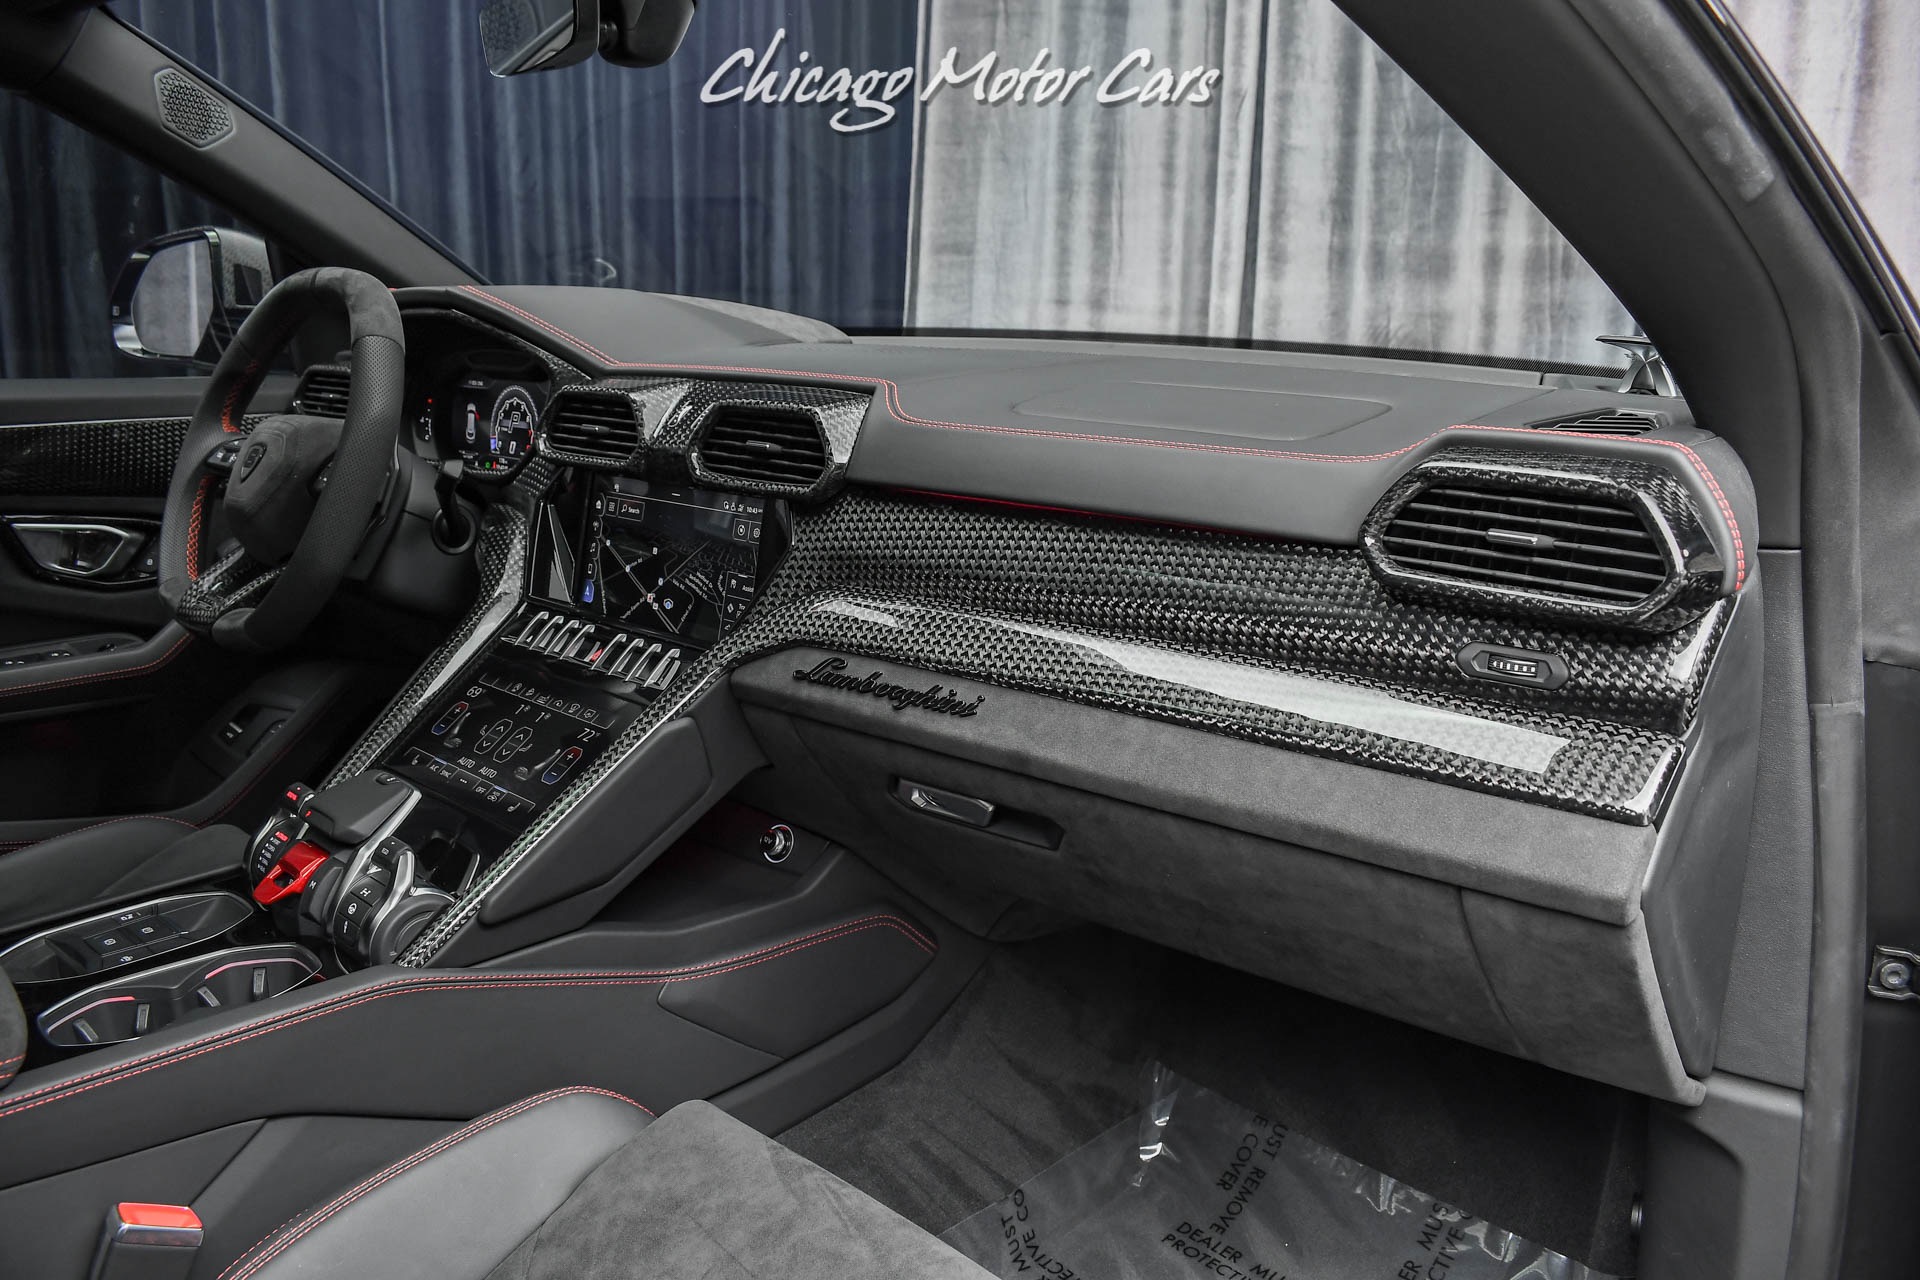 Used 2020 Lamborghini Urus SUV Matte Black BRAND NEW Build! MANSORY  WideBody Carbon Fiber! FULL PPF! For Sale (Special Pricing) | Chicago Motor  Cars Stock #19420